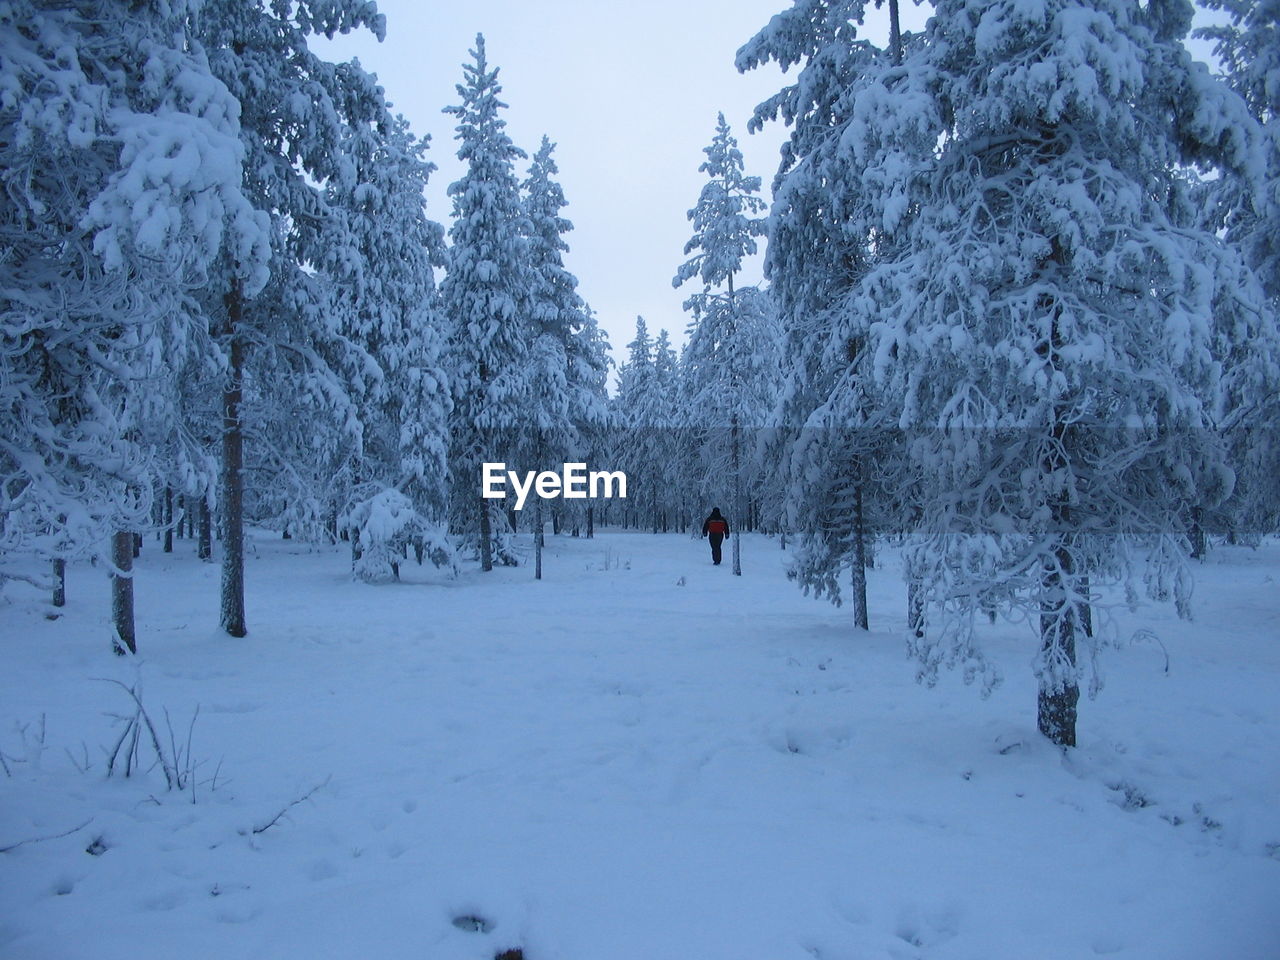 Person walking by trees on snow covered land